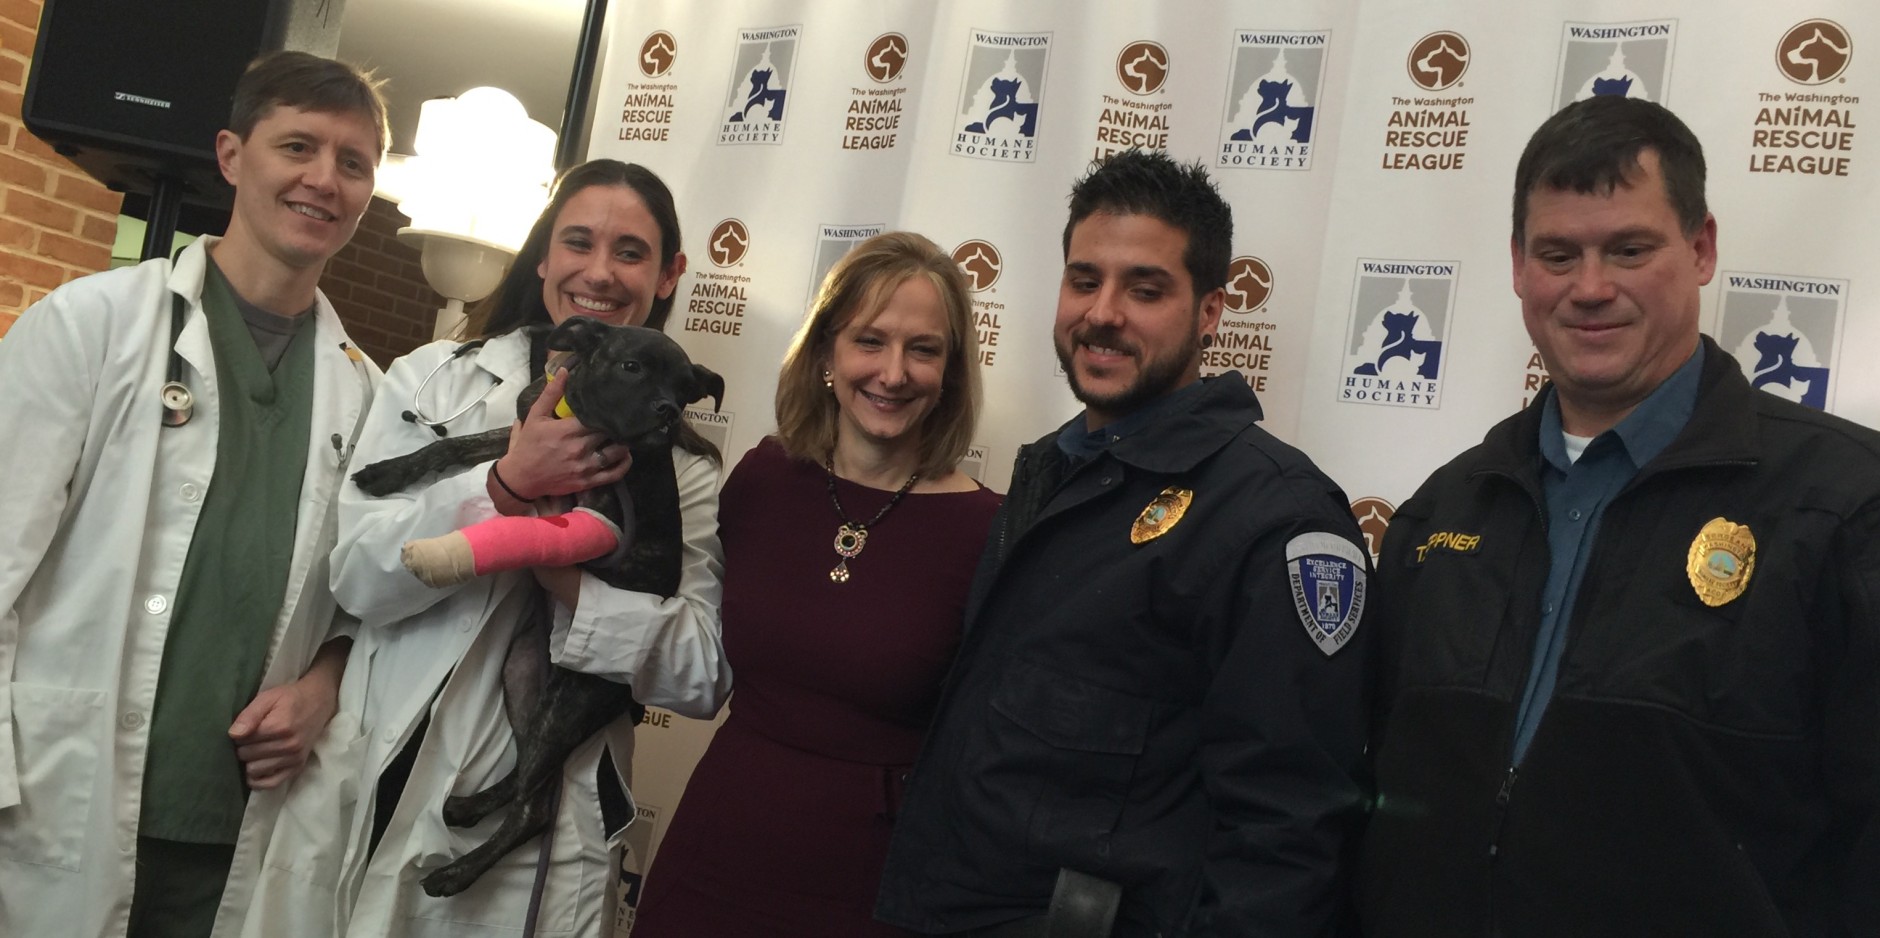 Now the cops and docs work for the same group. Vets Daniel Shillito and Megan McAndrew, formerly of WARL, the new group's CEO Lisa LaFontaine and officers Ted Deppner and Dan D'Eramo formerly of WHS with Daisy, the new group's inaugural animal transfer. (WTOP/Kristi King)